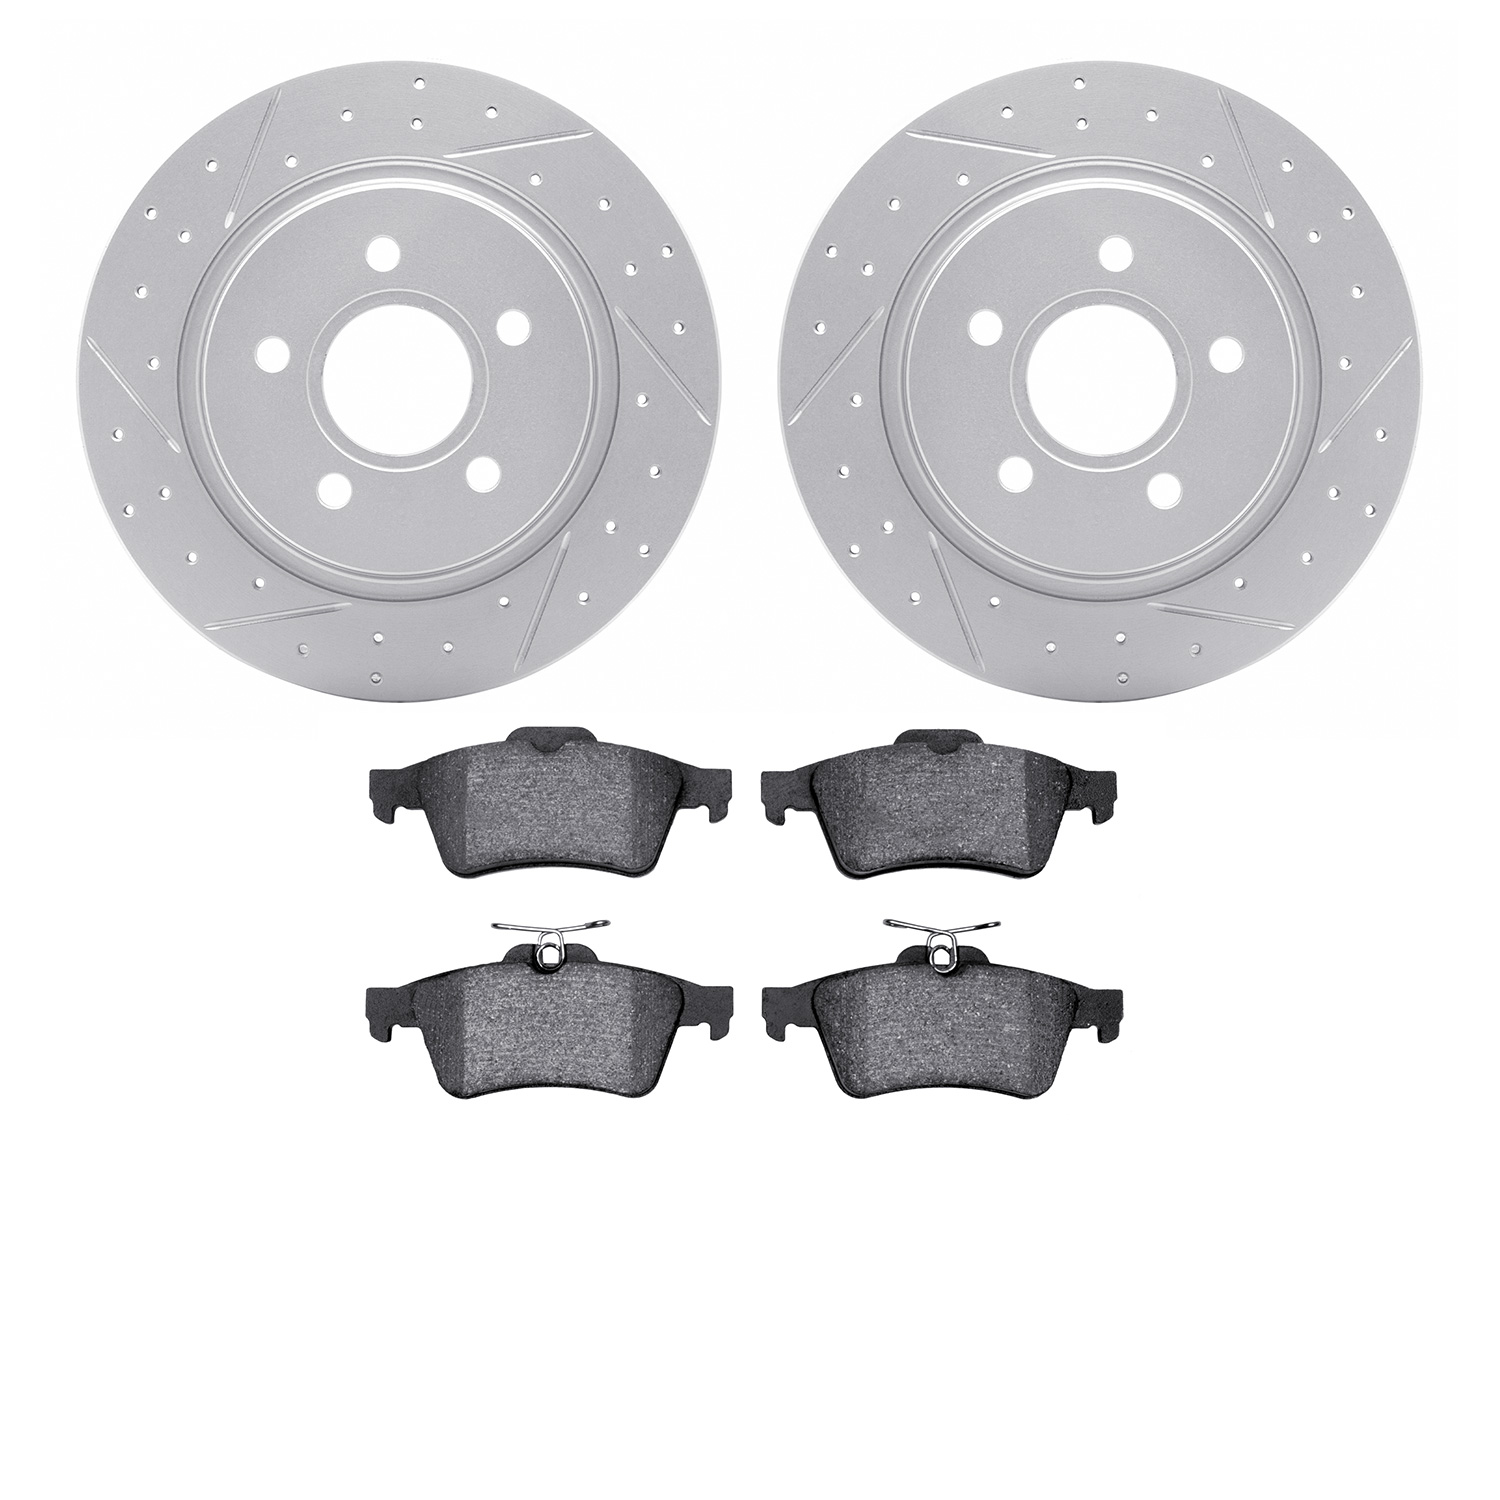 2502-27021 Geoperformance Drilled/Slotted Rotors w/5000 Advanced Brake Pads Kit, 2004-2013 Volvo, Position: Rear